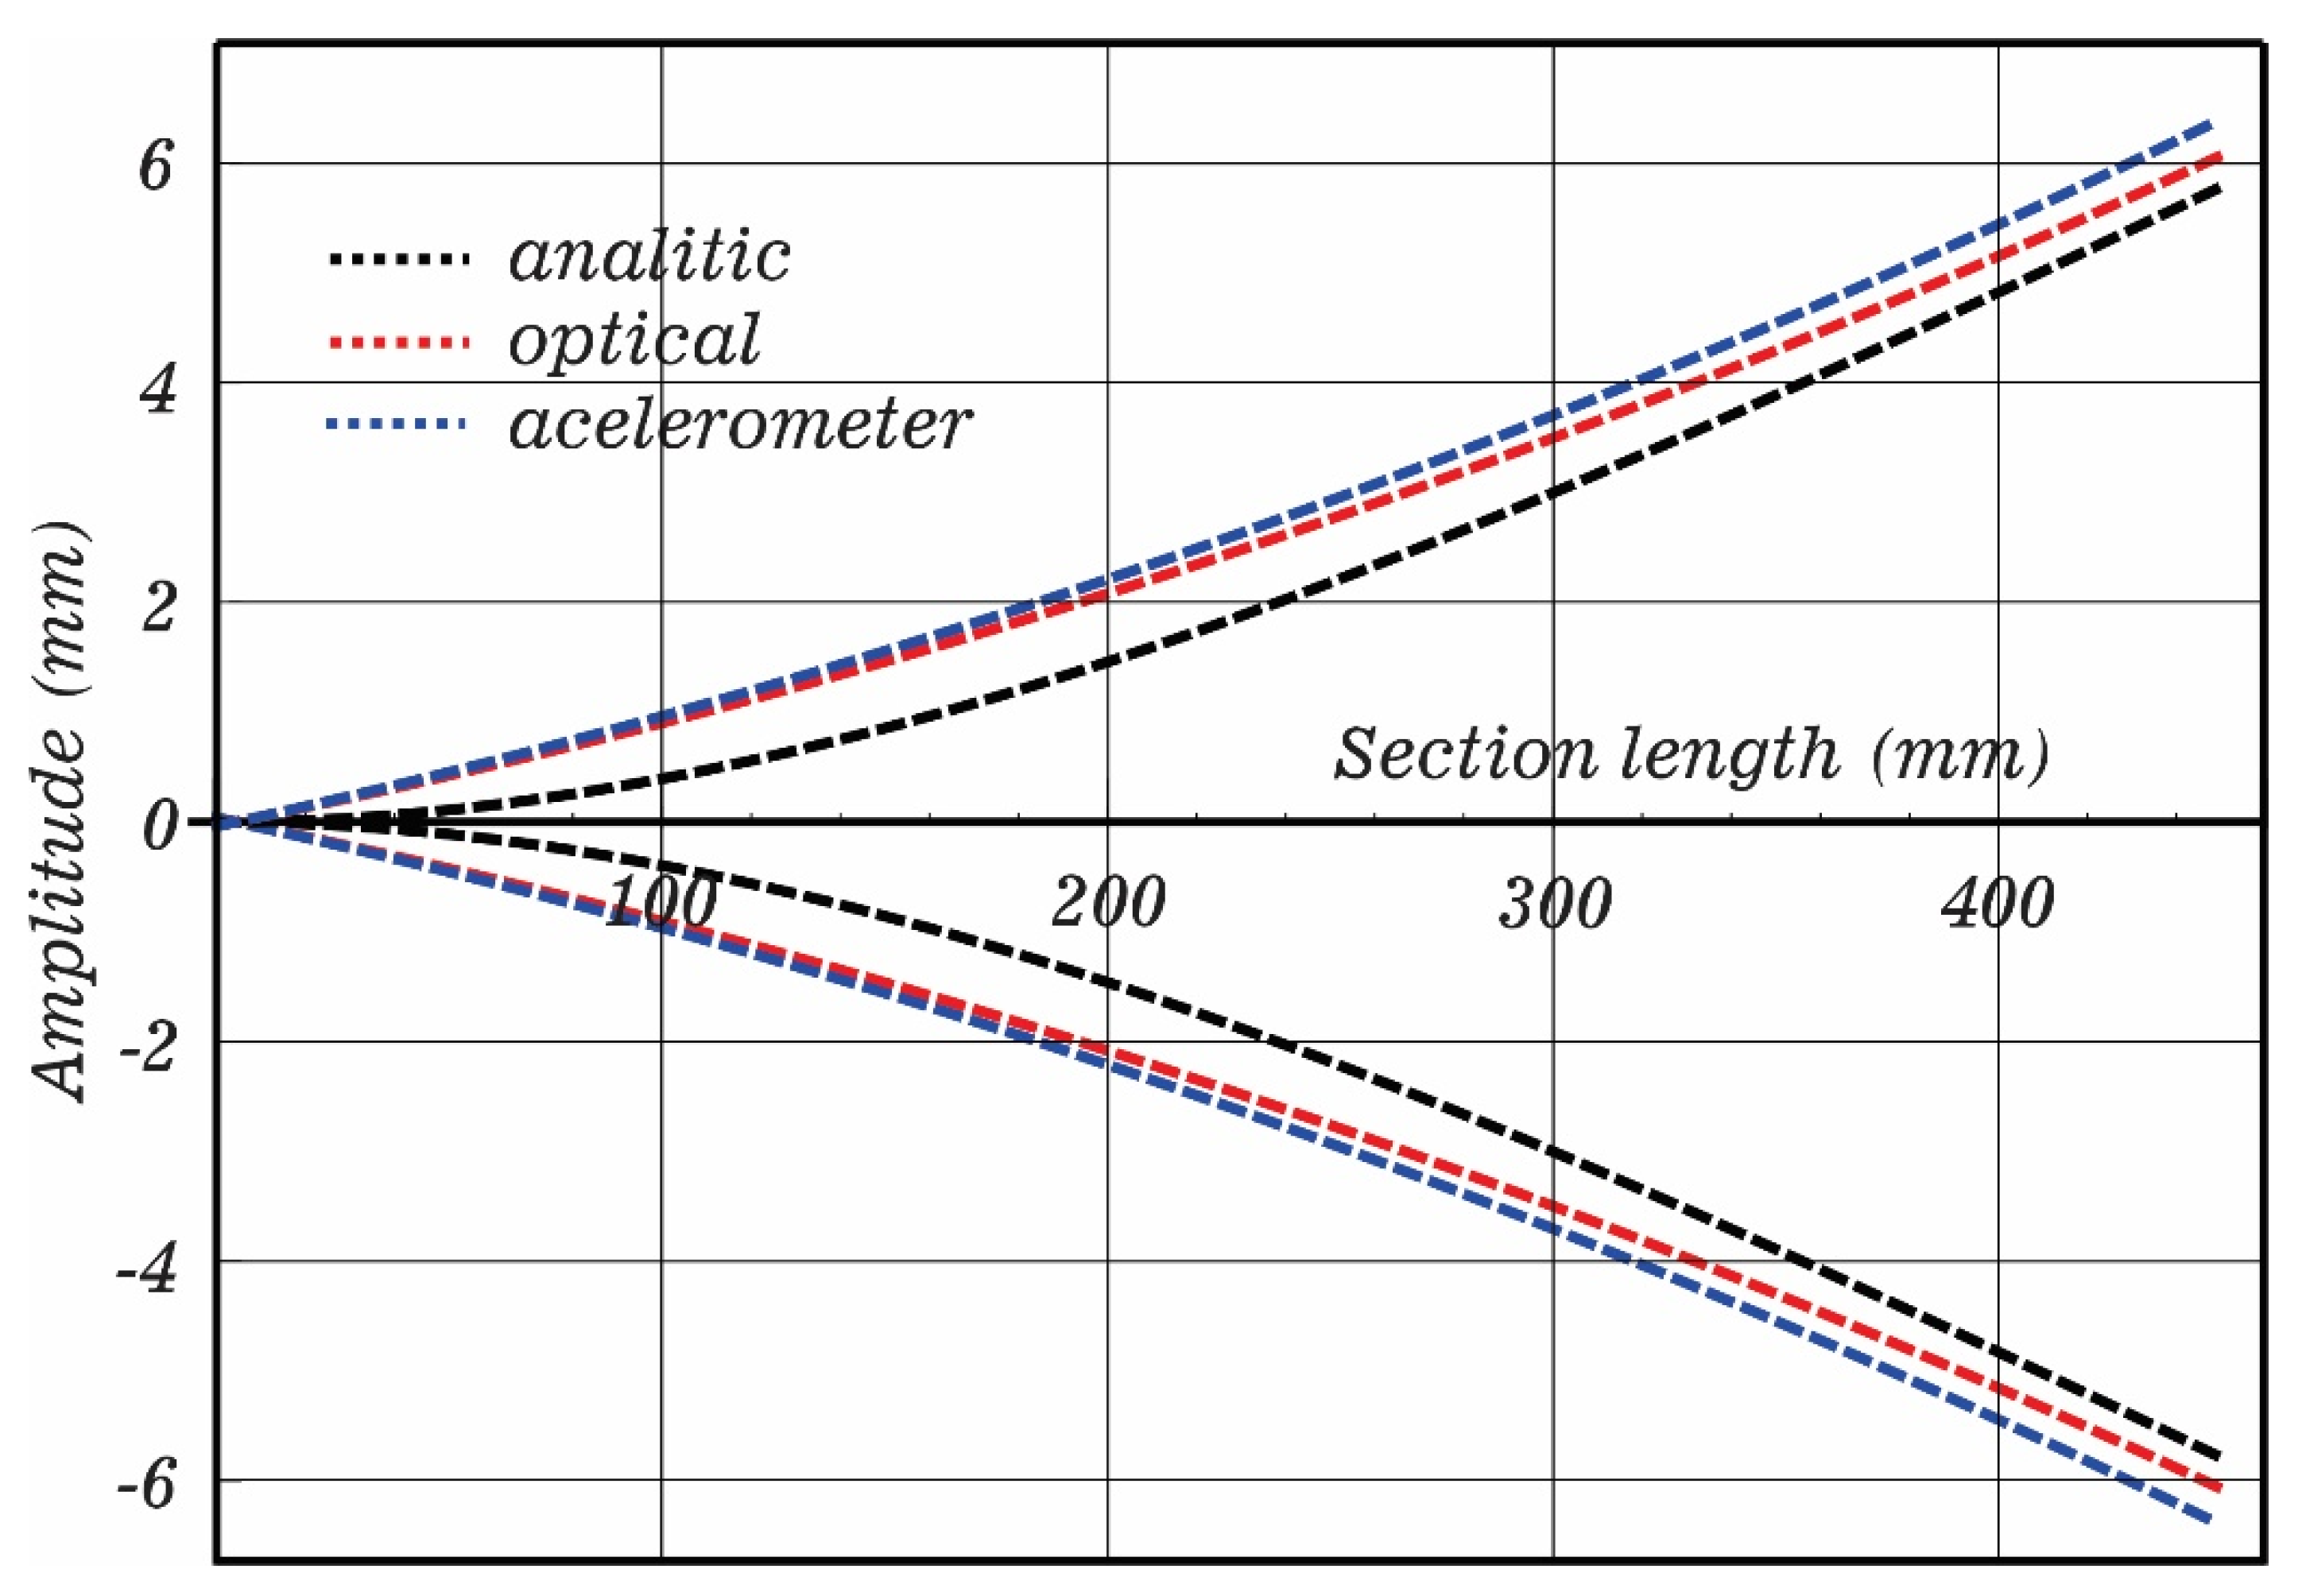 Symmetry | Free Full-Text | Vibration Measurement Using Laser Triangulation  for Applications in Wind Turbine Blades | HTML